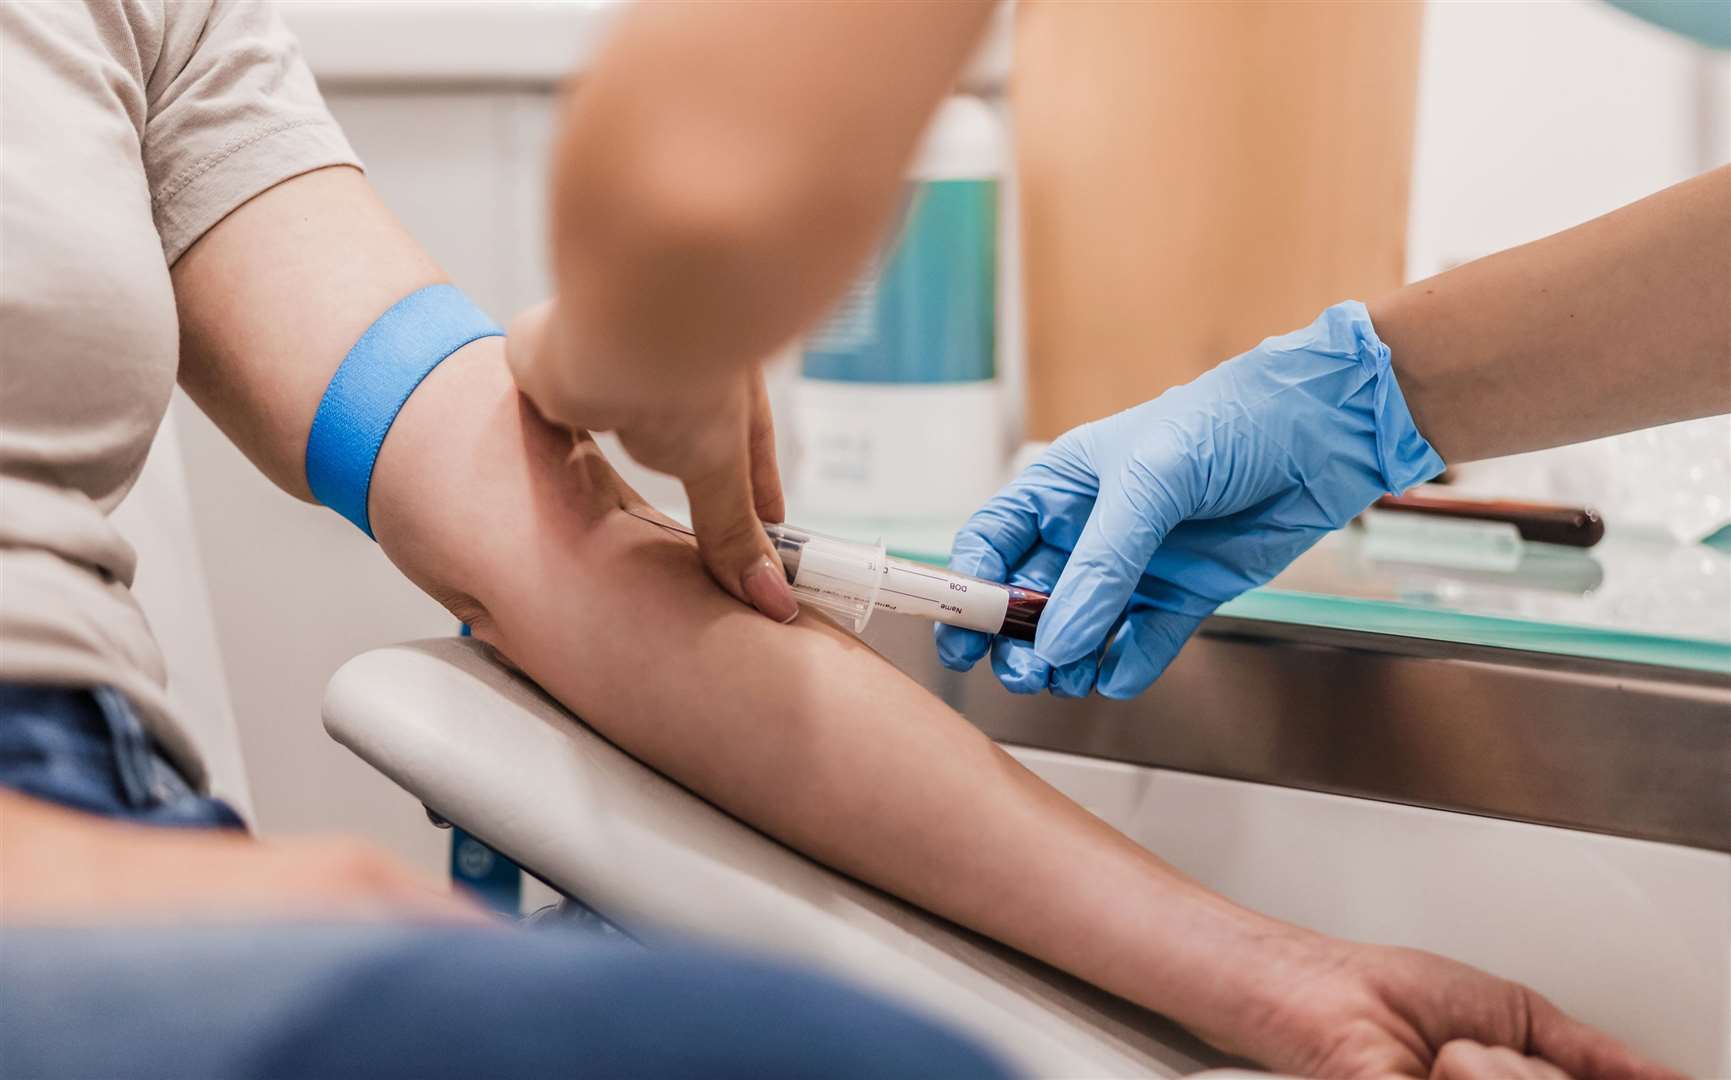 Ac doctor takes a blood sample Photo: istock